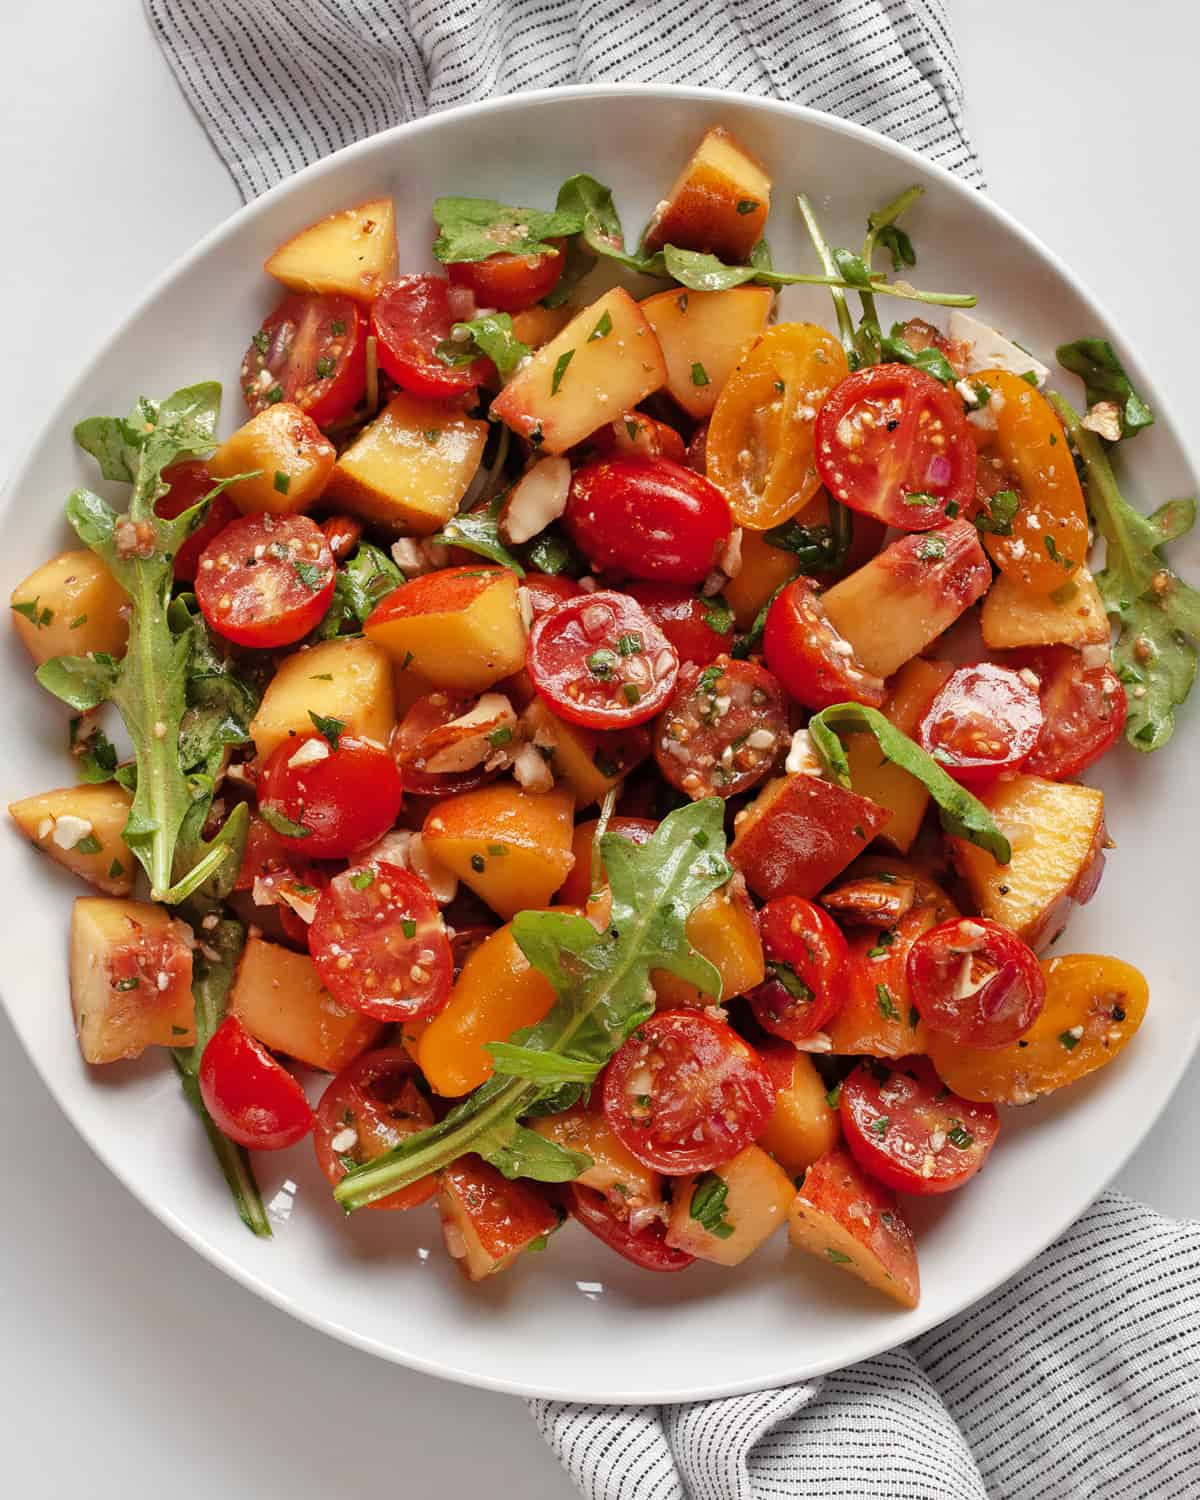 Balsamic peach tomato salad on a plate.